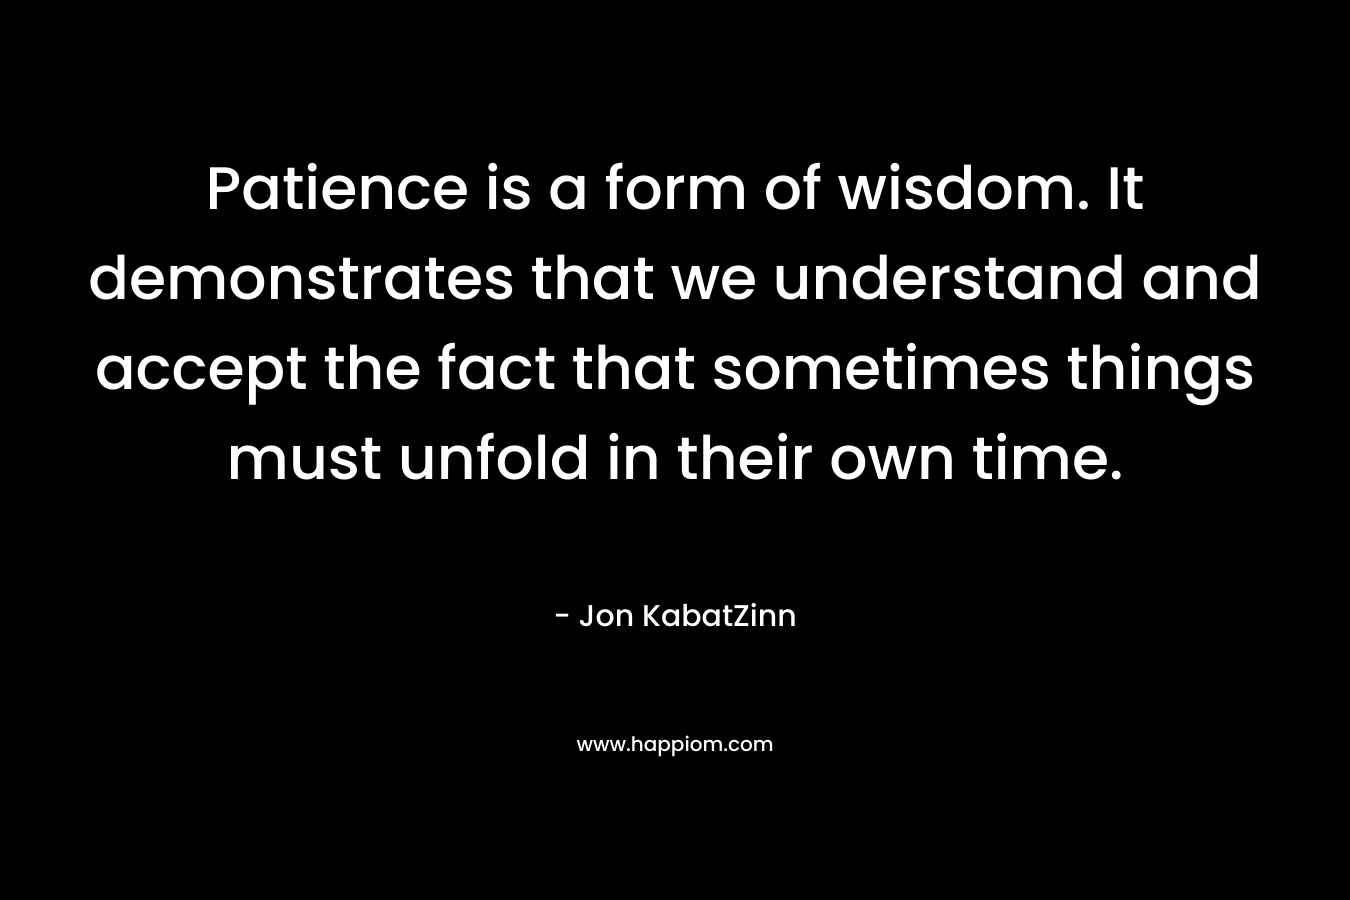 Patience is a form of wisdom. It demonstrates that we understand and accept the fact that sometimes things must unfold in their own time.